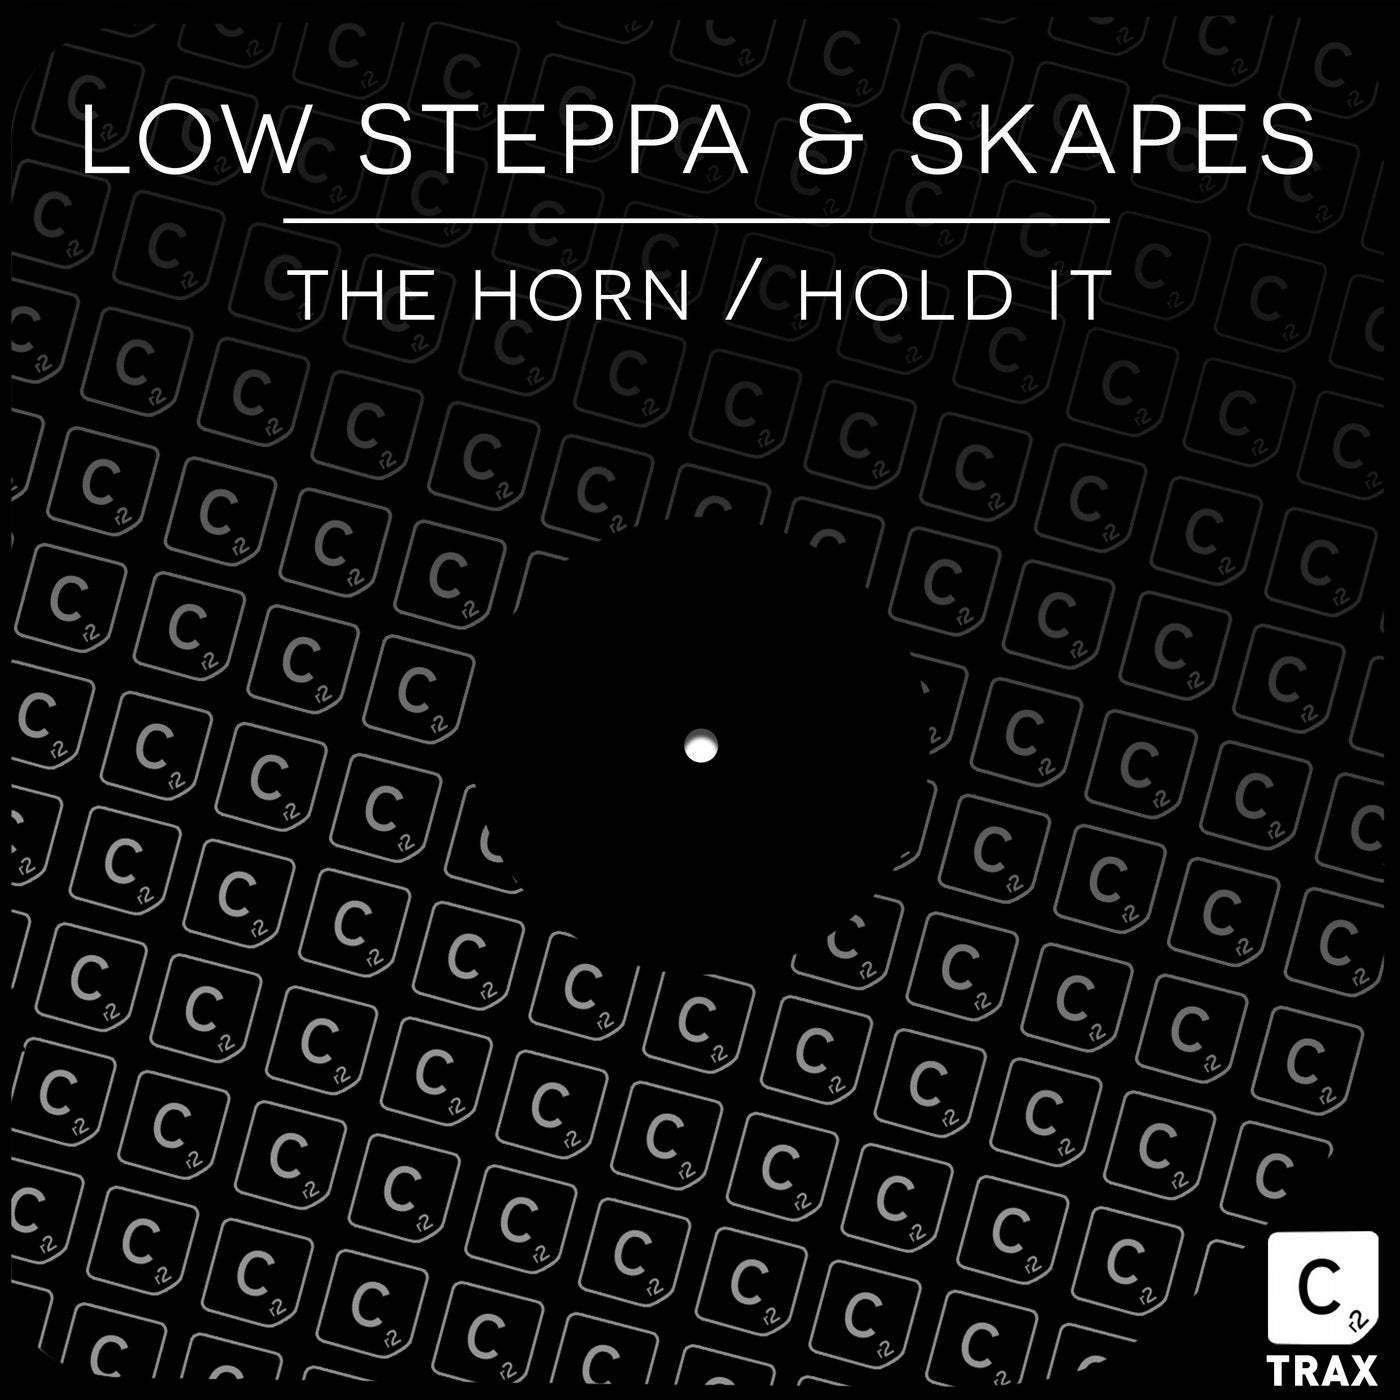 The Horn / Hold It